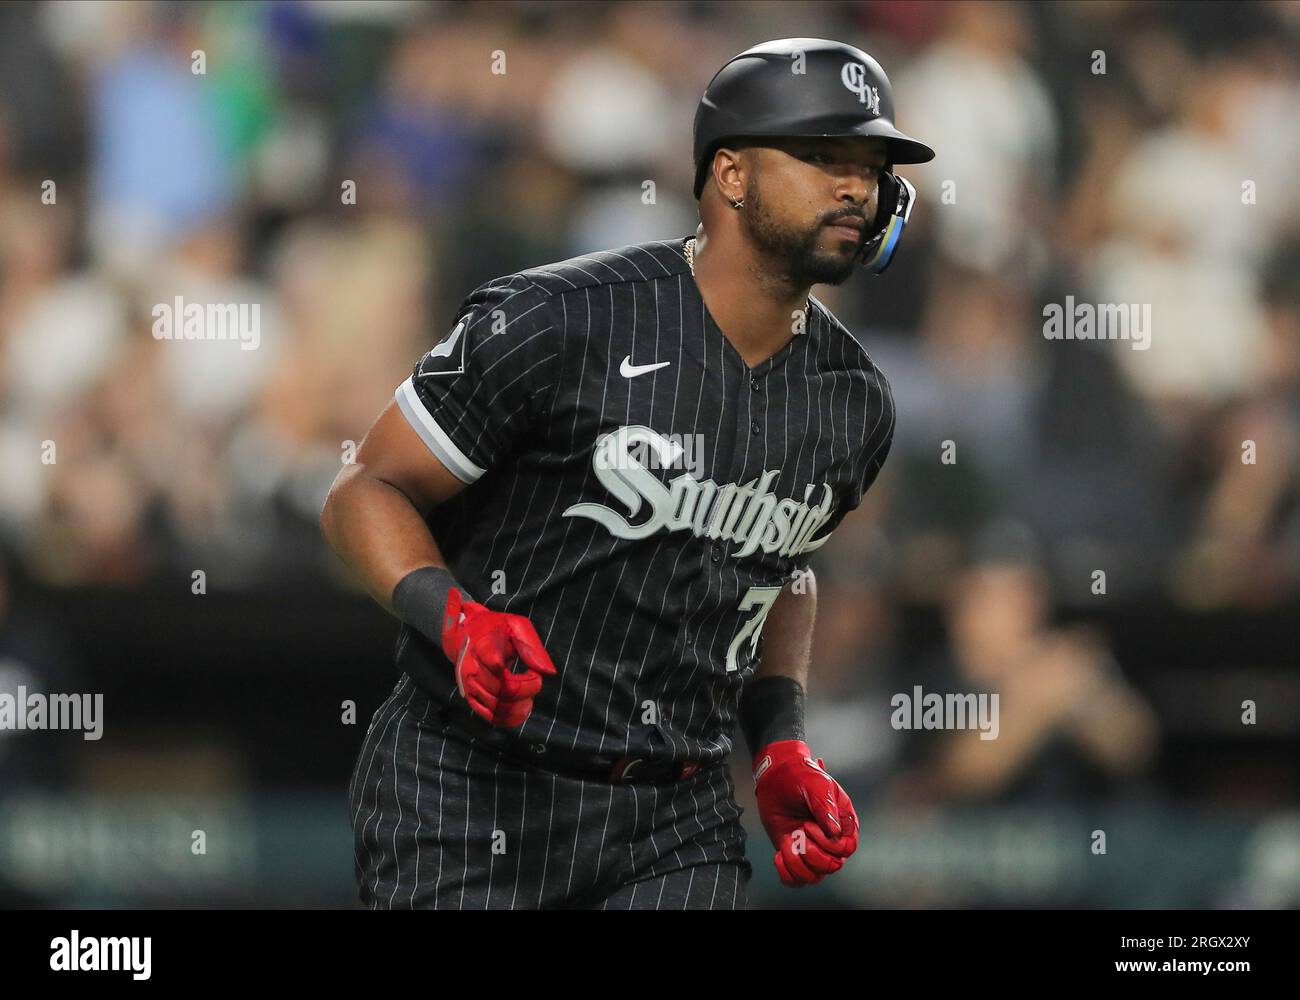 CHICAGO, IL - AUGUST 11: Chicago White Sox designated hitter Eloy Jimenez ( 74) looks on after hitting a home run during a Major League Baseball game  between the Milwaukee Brewers and the